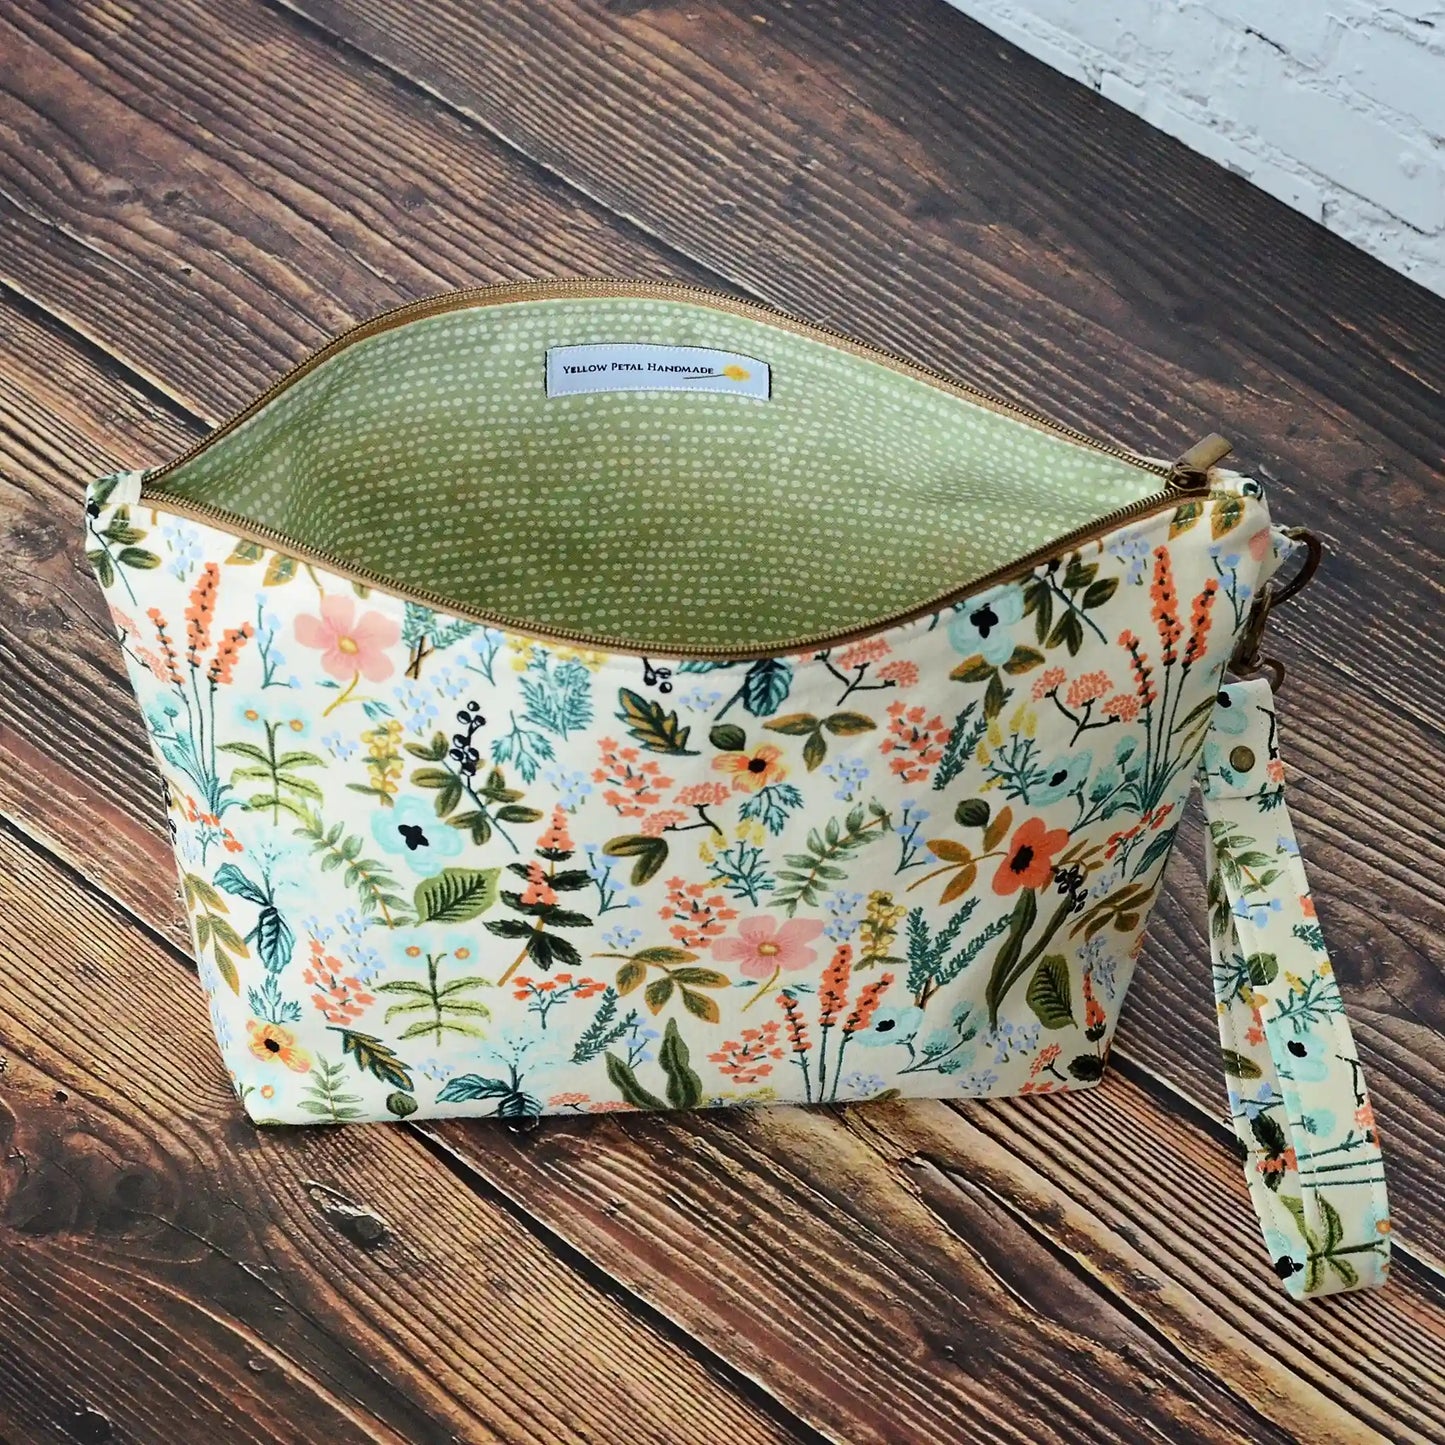 Zippered pouch with removable strap in Rifle Paper's Herb Garden Fabric.  Lined in a pale green dotty fabric.  Made in Canada by Yellow Petal Handmade.